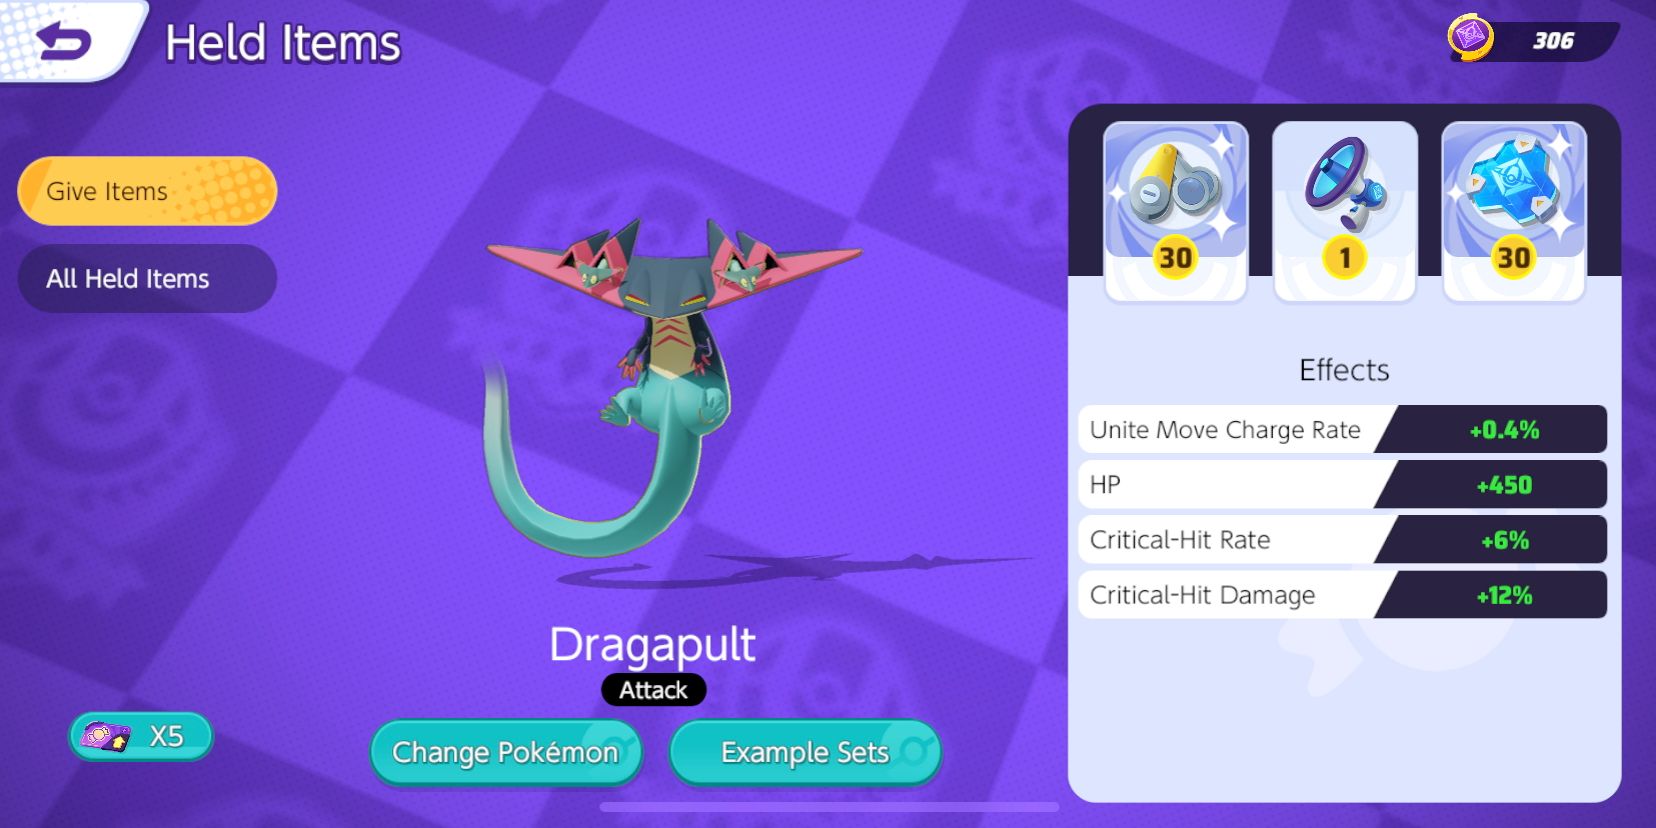 Dragapult Held Item selection screen from Pokemon Unite, with Scope Lens, Energy Amp and Buddy Barrier